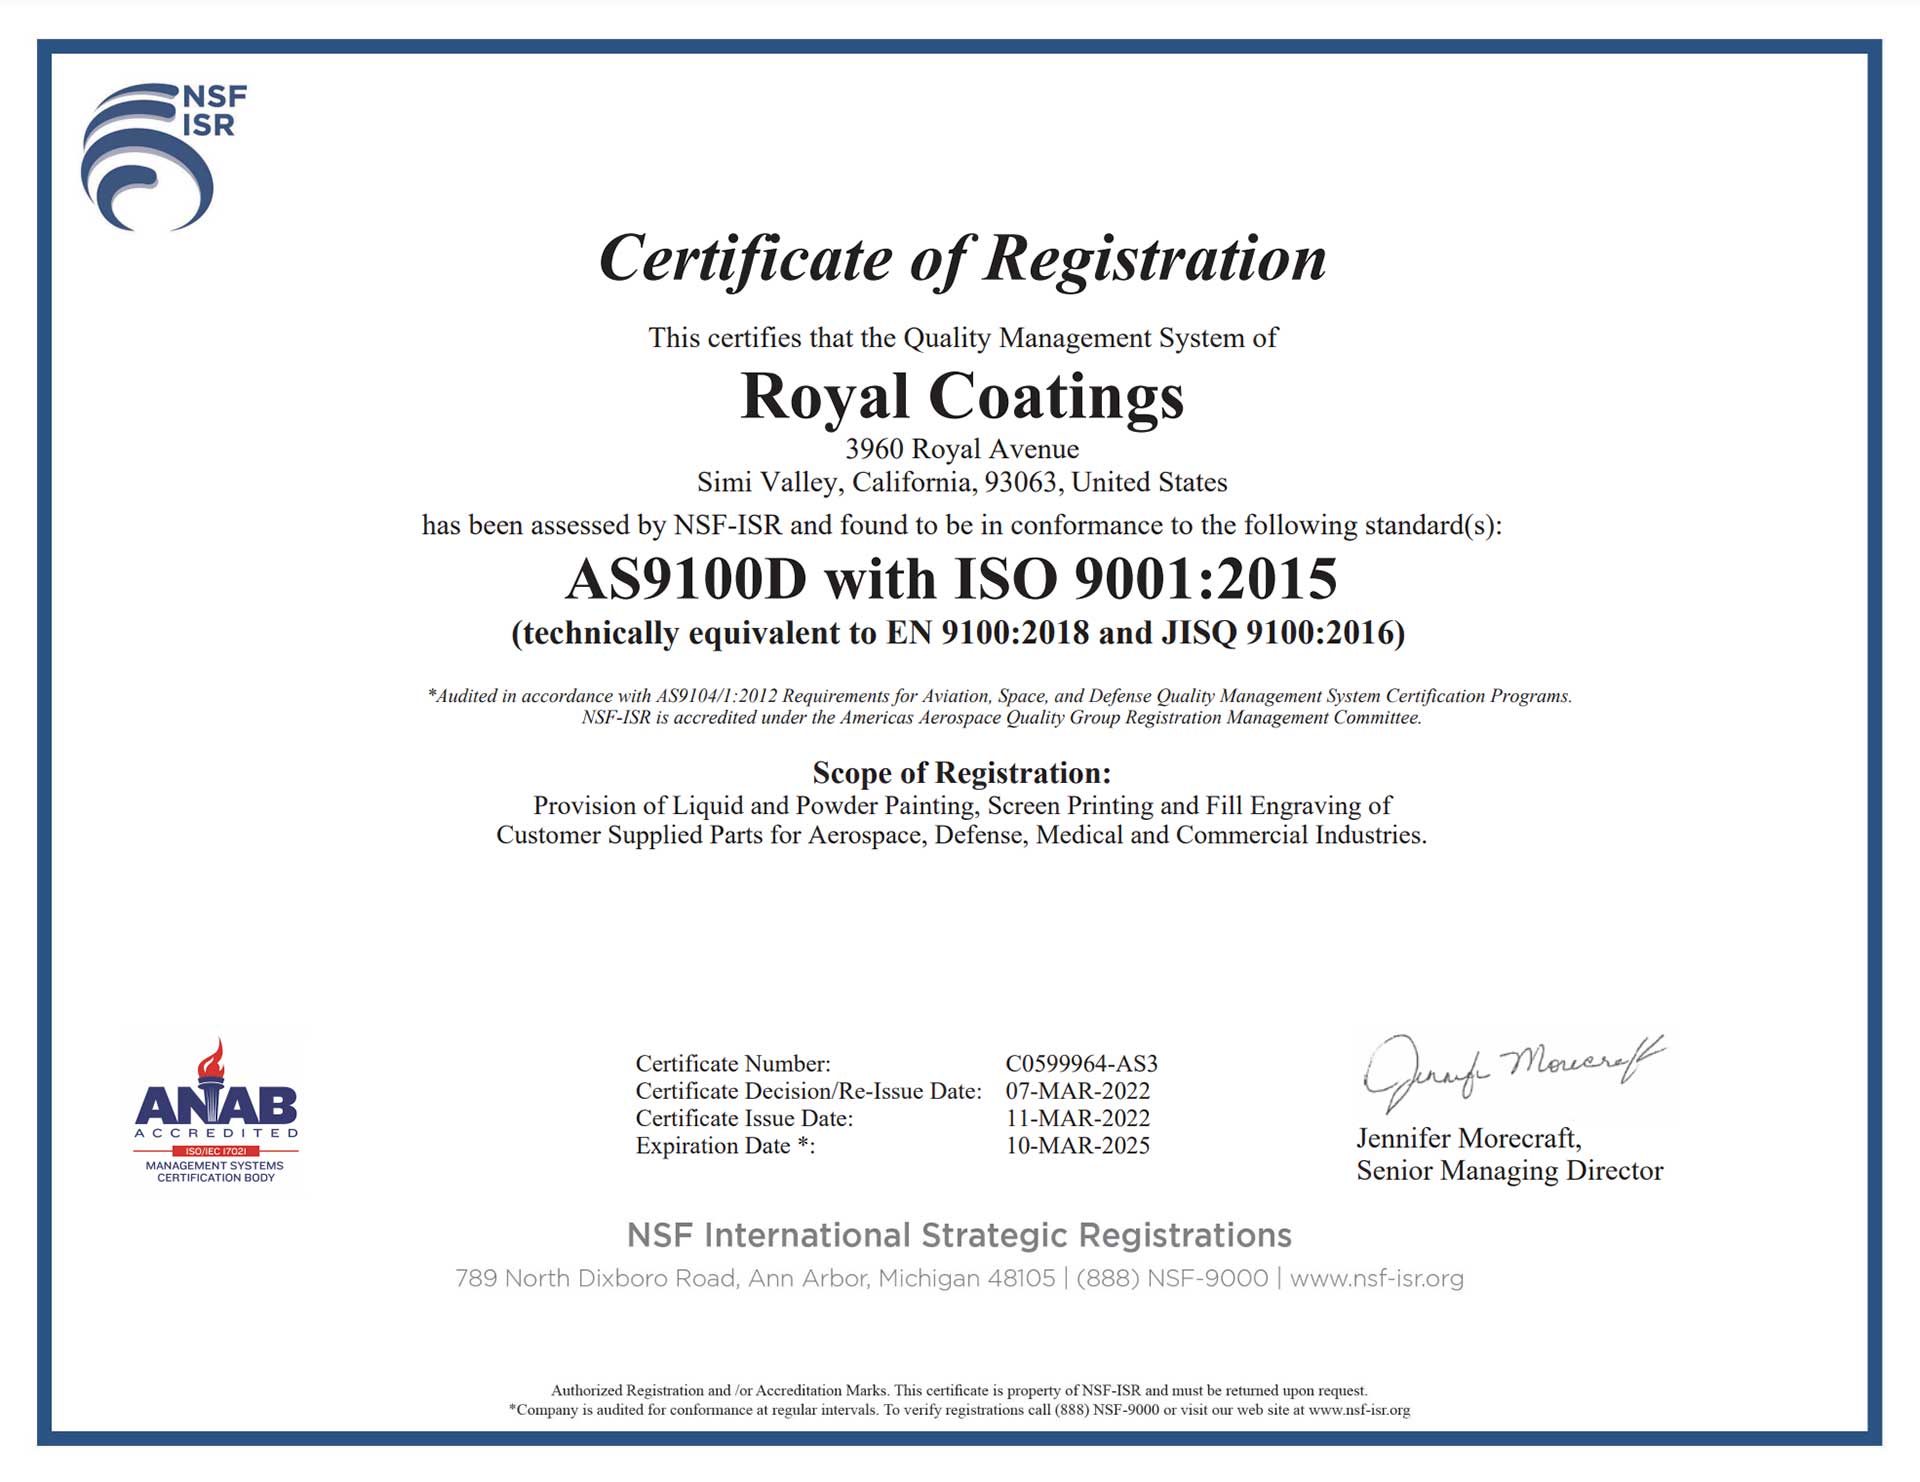 NSF-ISR AS9100D and ISO 9001